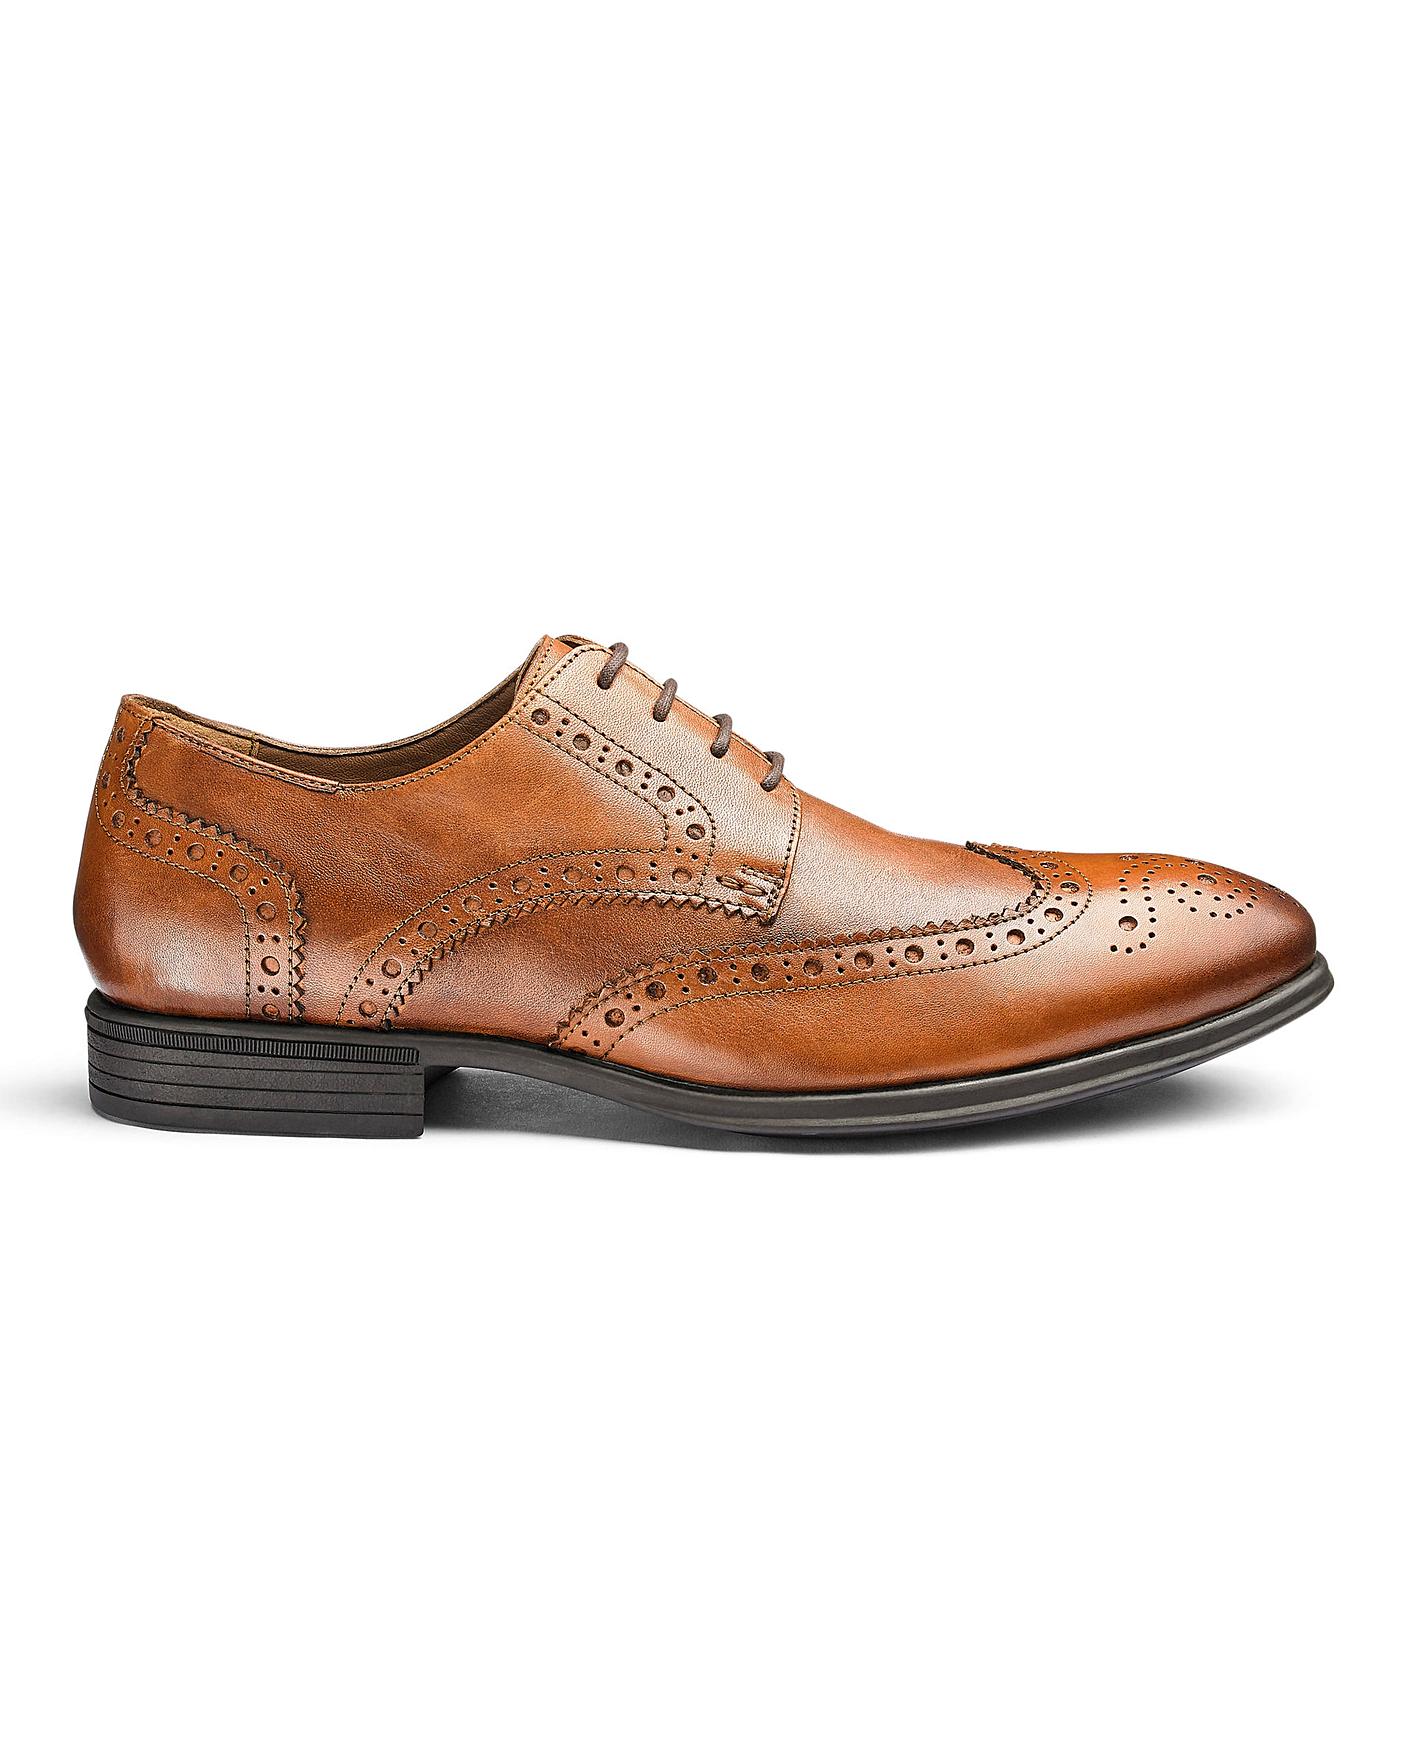 Soleform Leather Brogues Extra Wide